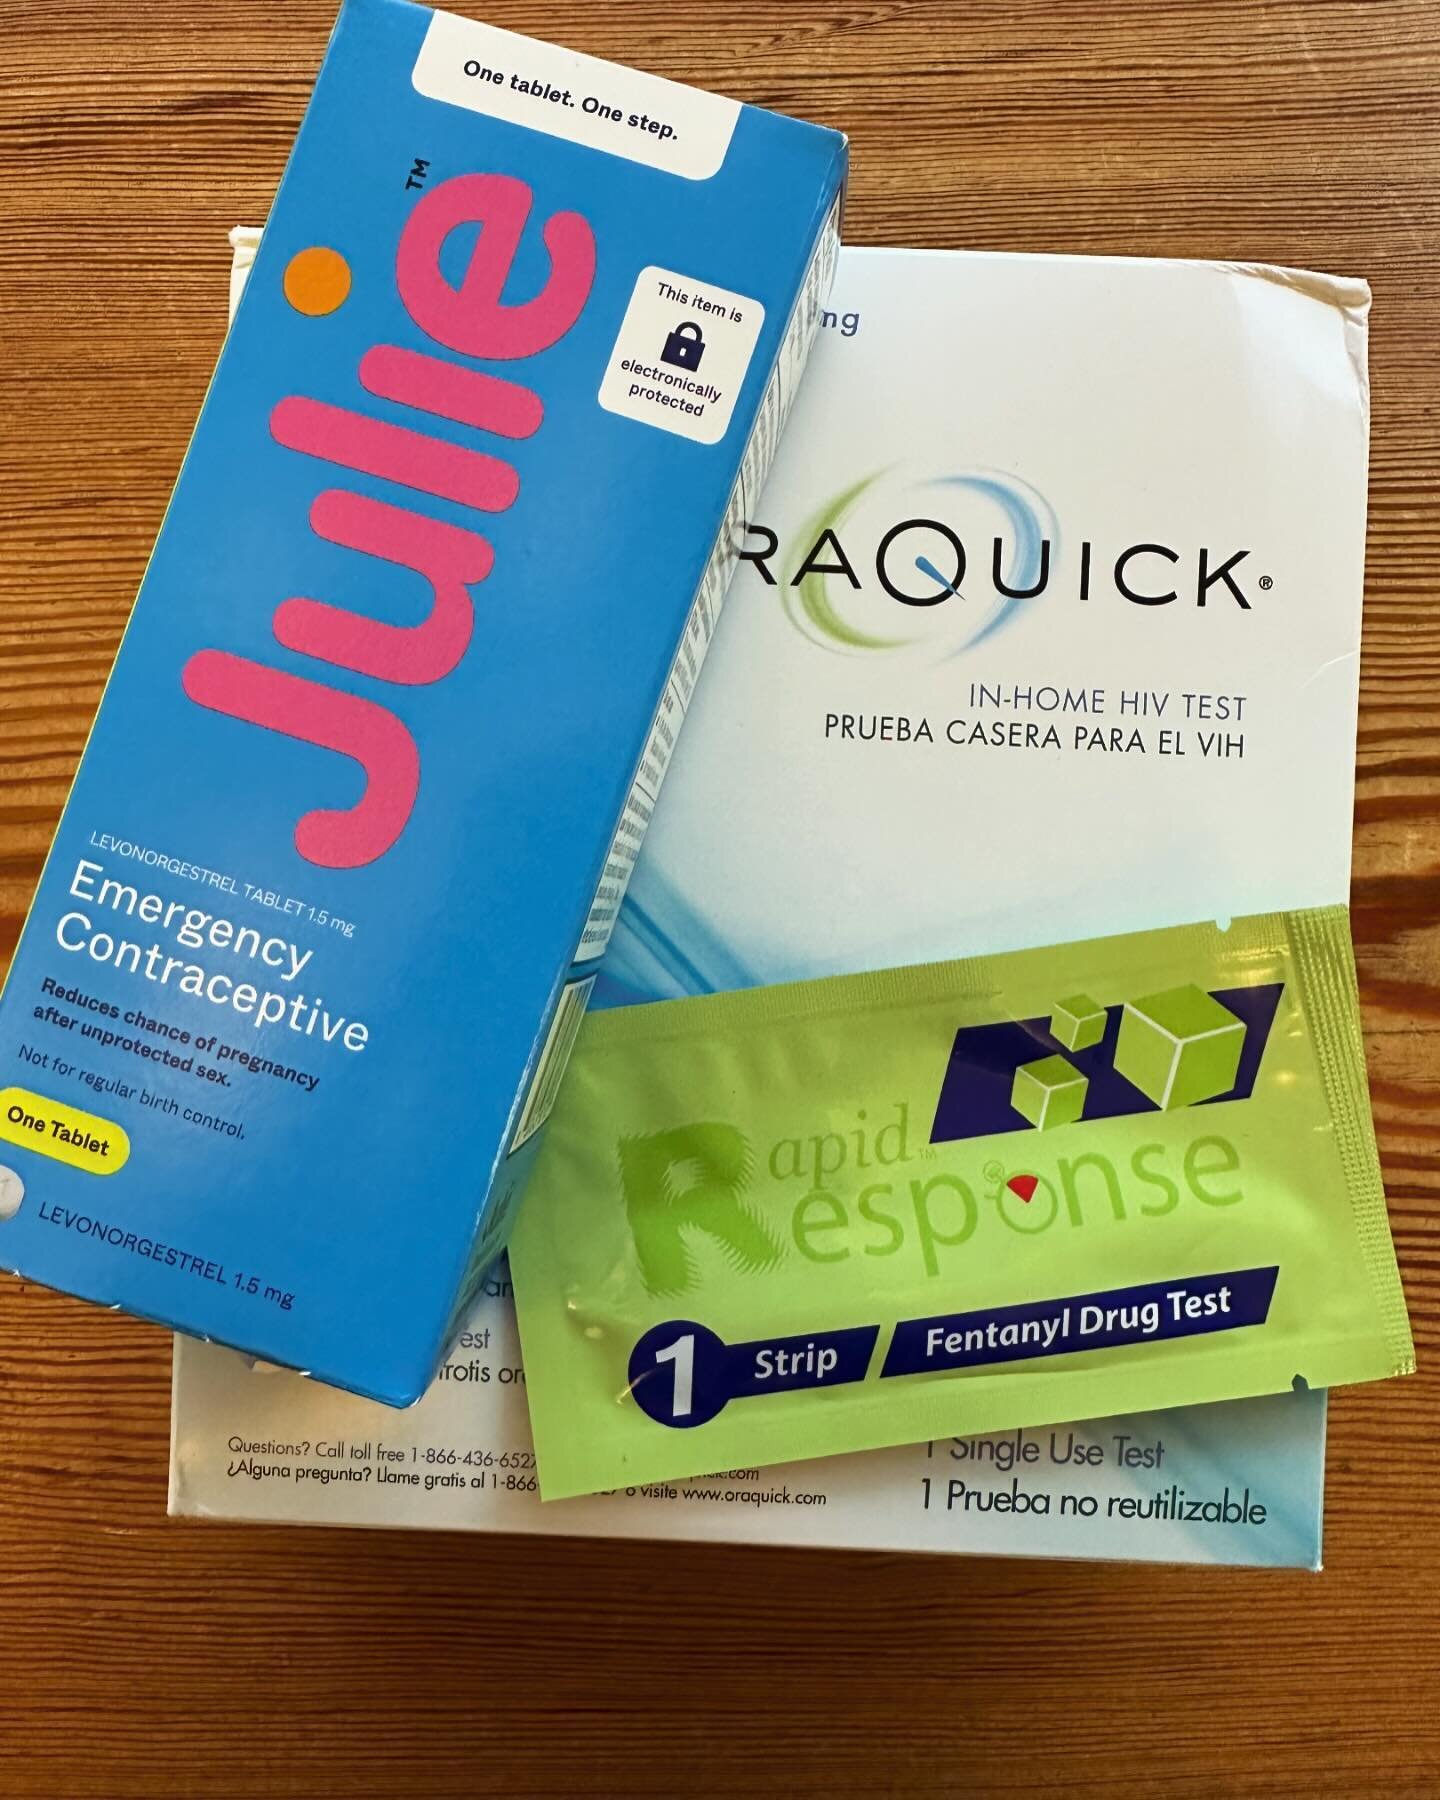 Thanks to the amazing organizations that are @kytranshealth and @queerkentucky as well as others, we are able to keep FREE plan b, HIV testing and fentanyl test strips behind the bar at all times! Anytime you are in need of these helpful tools, feel 